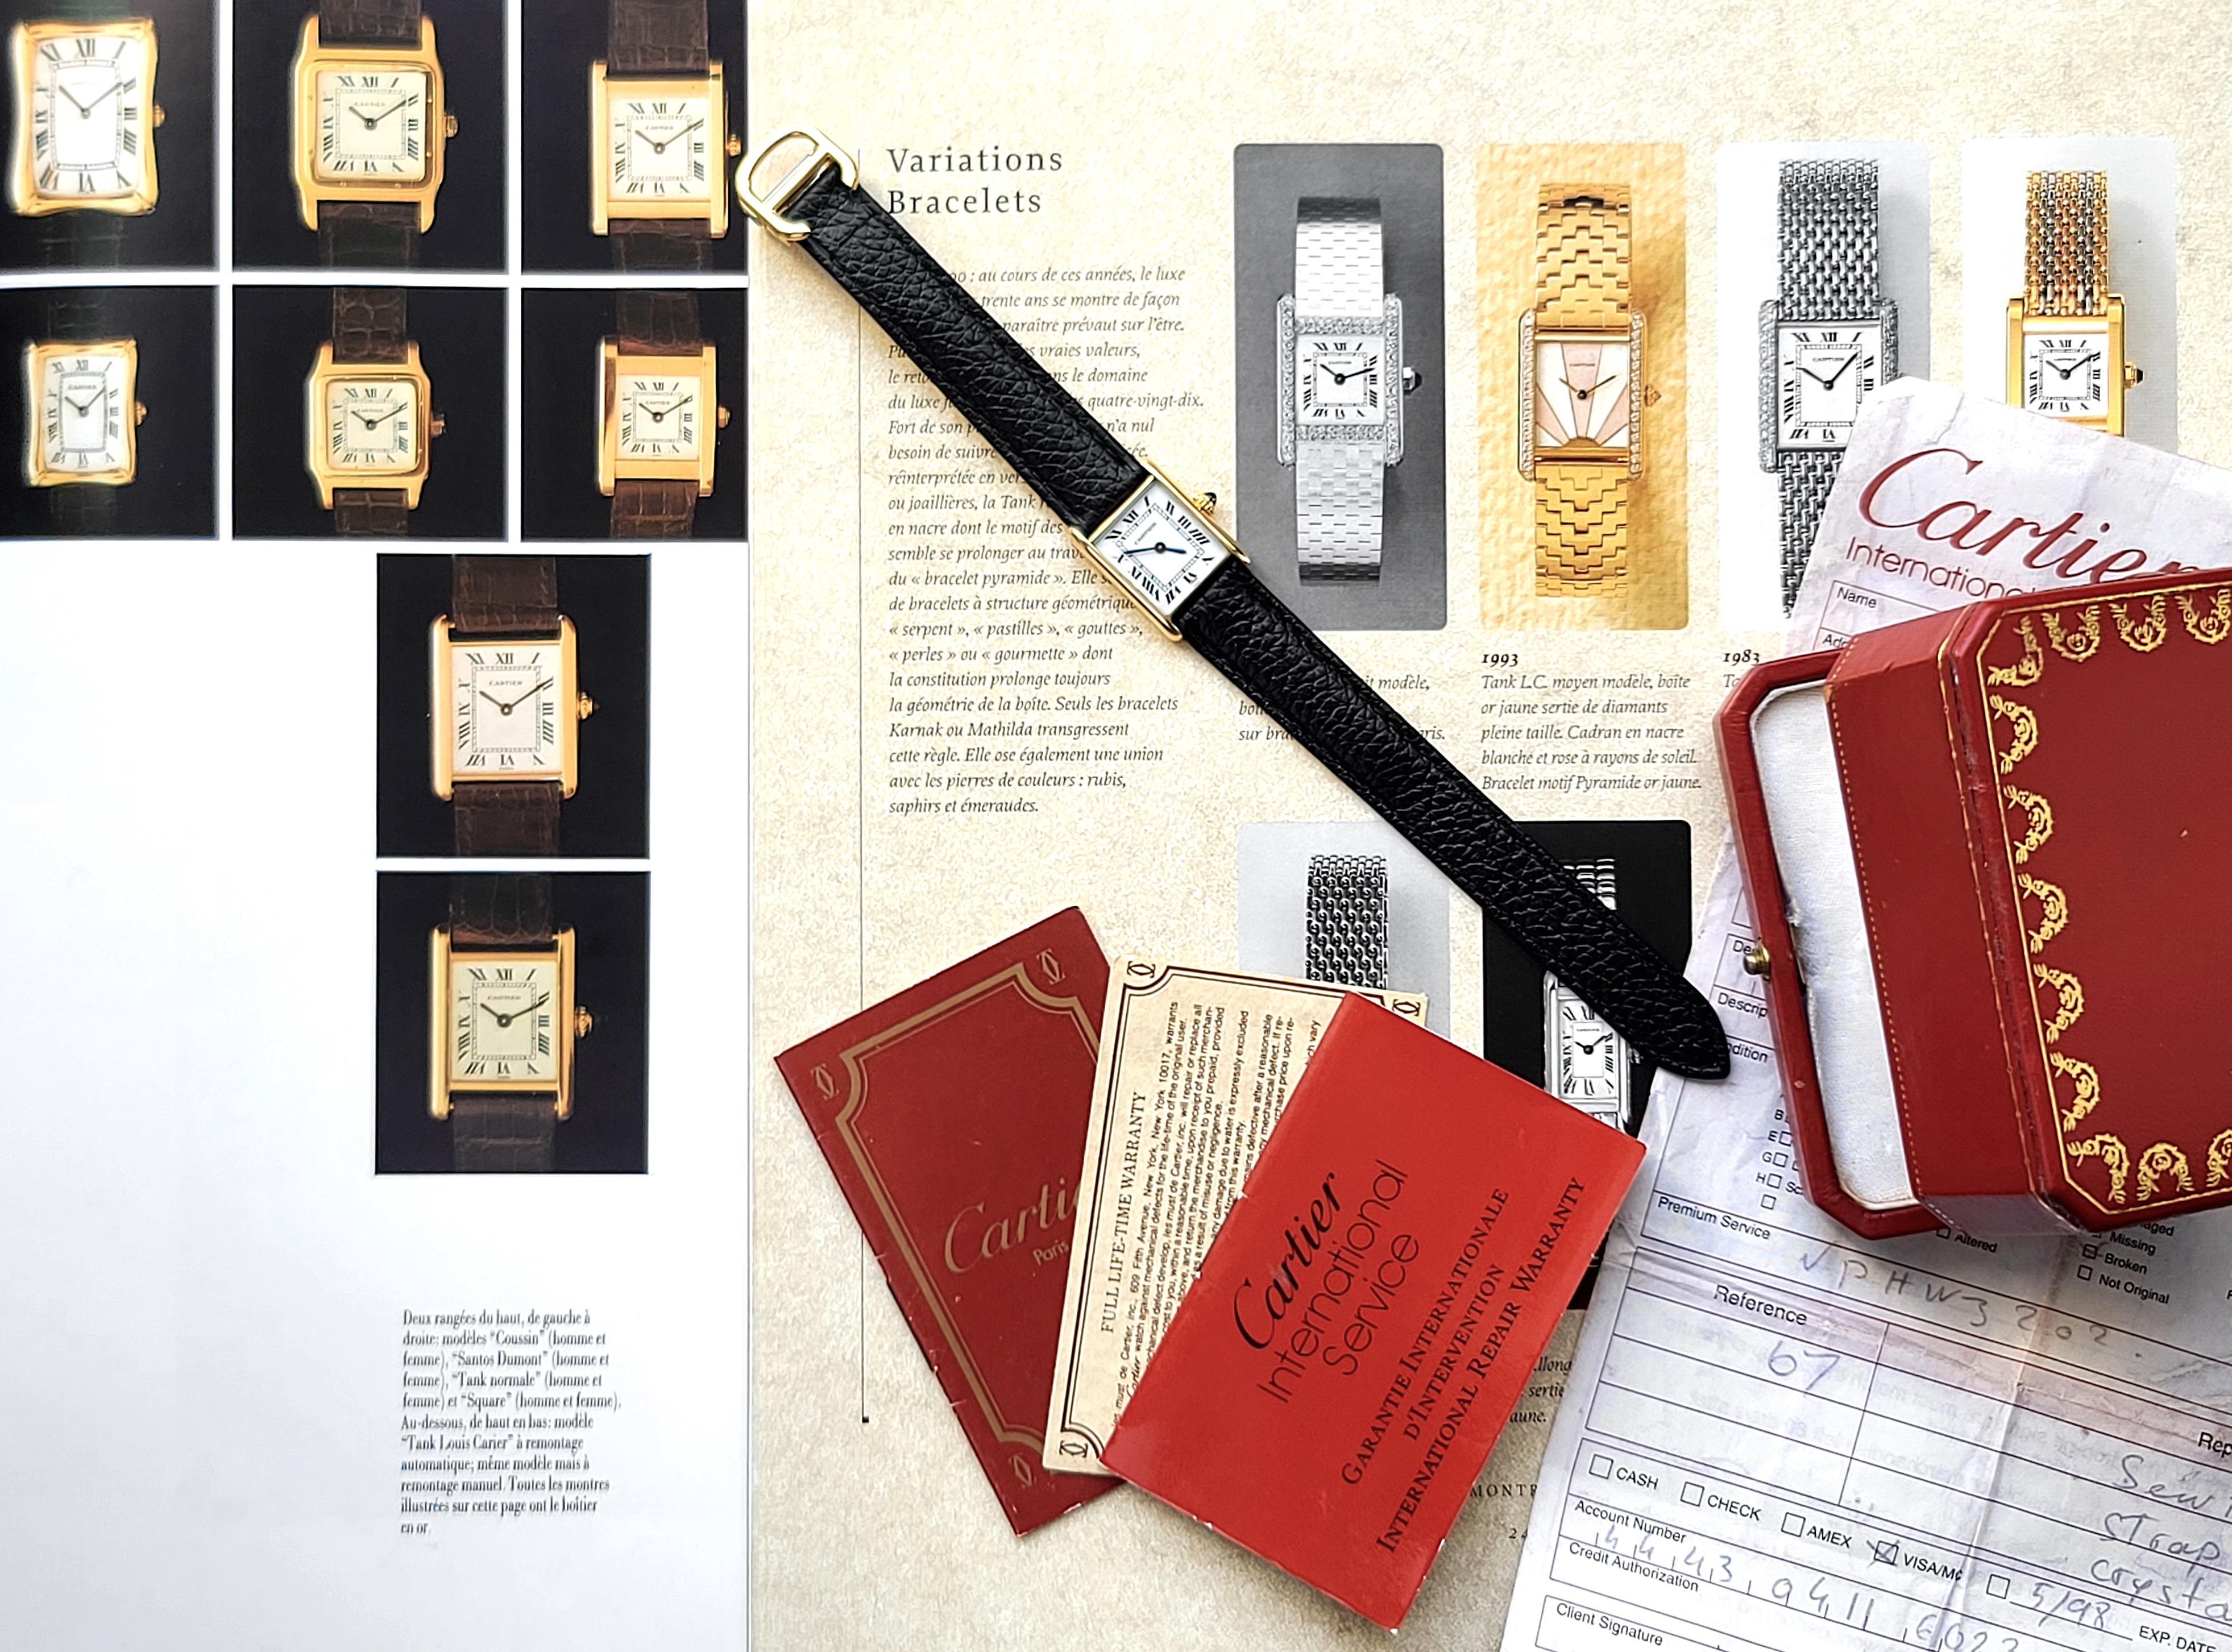 CARTIER
Founded in 1847

For the discerning few

Wear Cartier watch it's integrate the club of famous clients : Jackie Kennedy, Princess Diana, the Duchess of Windsor, Princess Grace, Barbara Hutton, Elizabeth Taylor, Andy Warhol, Yves Saint